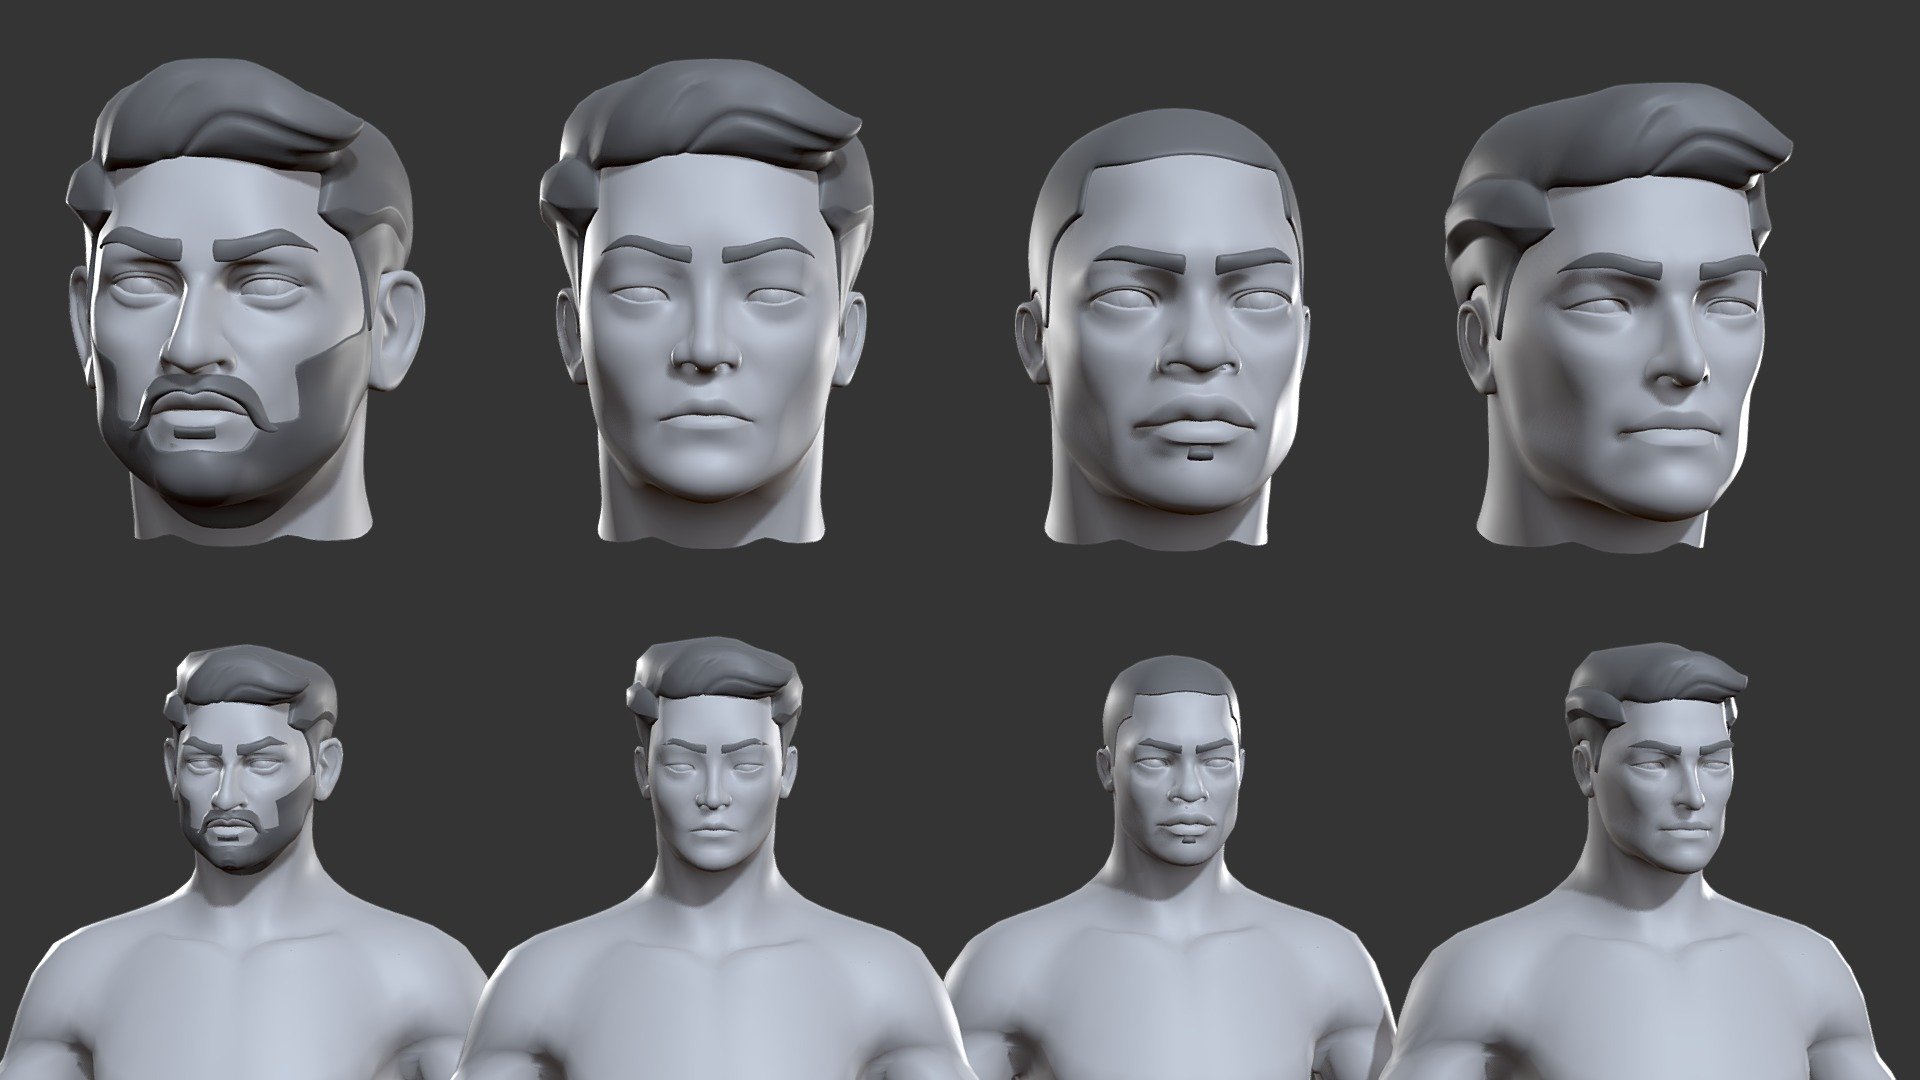 Visit the link to get this model on Artstation:


https://www.artstation.com/a/32805529
4 Male Races 
( Brown, Asian, Black, White ) 

BaseMesh  was made with proper topology and looping with Unwraped UV and no over lapping.

Ready for sculpting and texturing&hellip;

File format:




Obj

Fbx

Maya file

Blender file

Inside the product:




clean topology

single Udim 

unwrapped Uvs for texturing

no overlapping UVs

proper naming and grouping

no unwanted shaders and history.


👉https://skfb.ly/oOZIr 👈


You May also like:


👉 https://skfb.ly/oMLZT 👈


You may also like:


👉 https://skfb.ly/oSAX8 👈
 - Male " Four Races" BaseMesh - Buy Royalty Free 3D model by Tashi59 (@tsering) 3d model